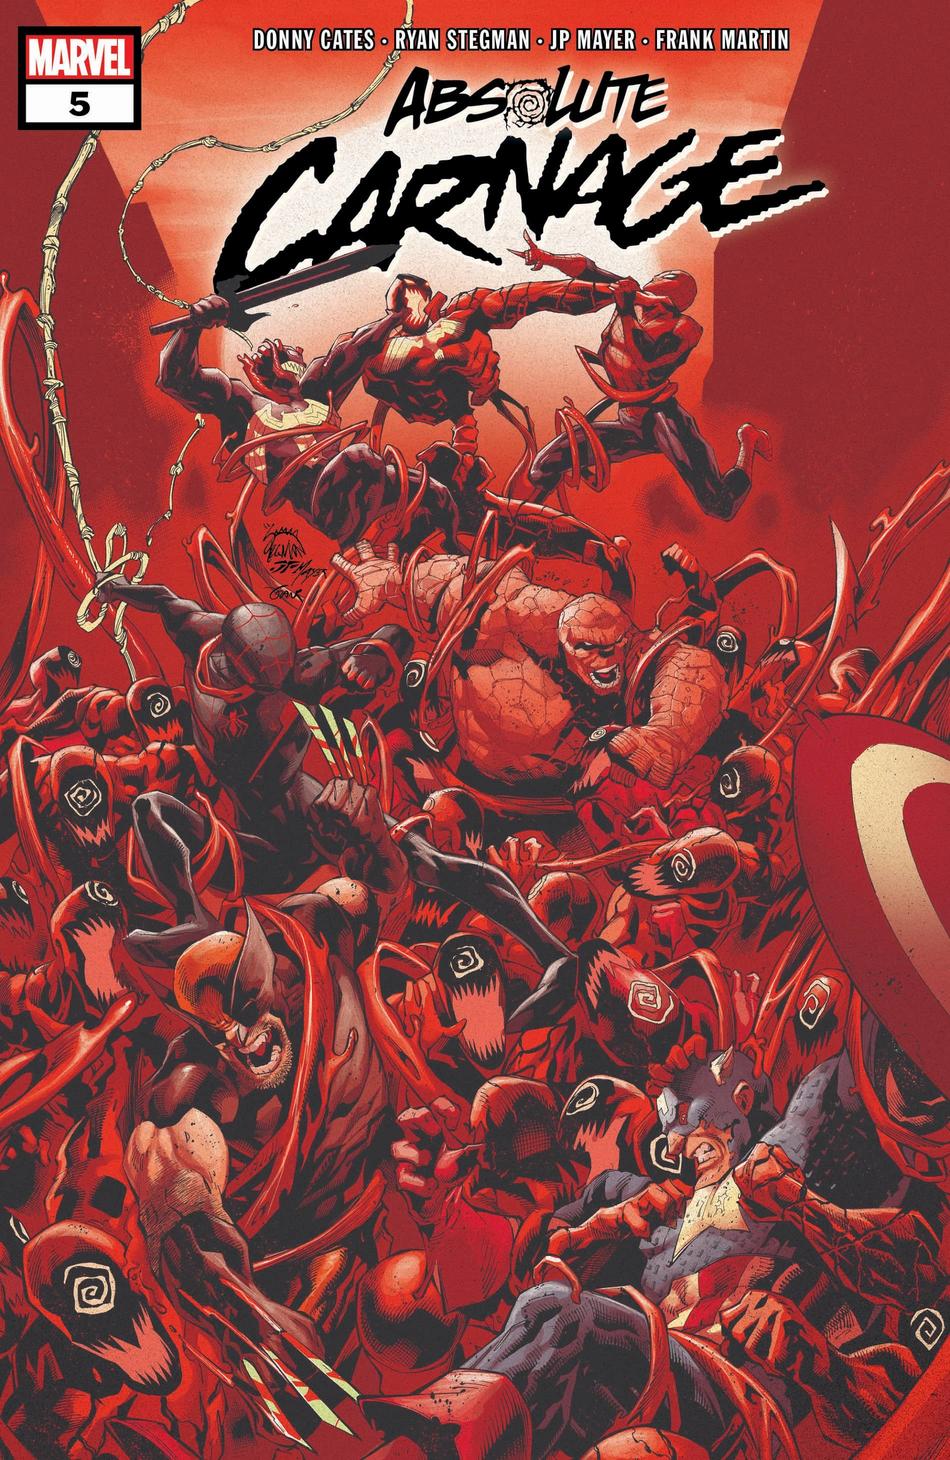 ABSOLUTE CARNAGE #5 